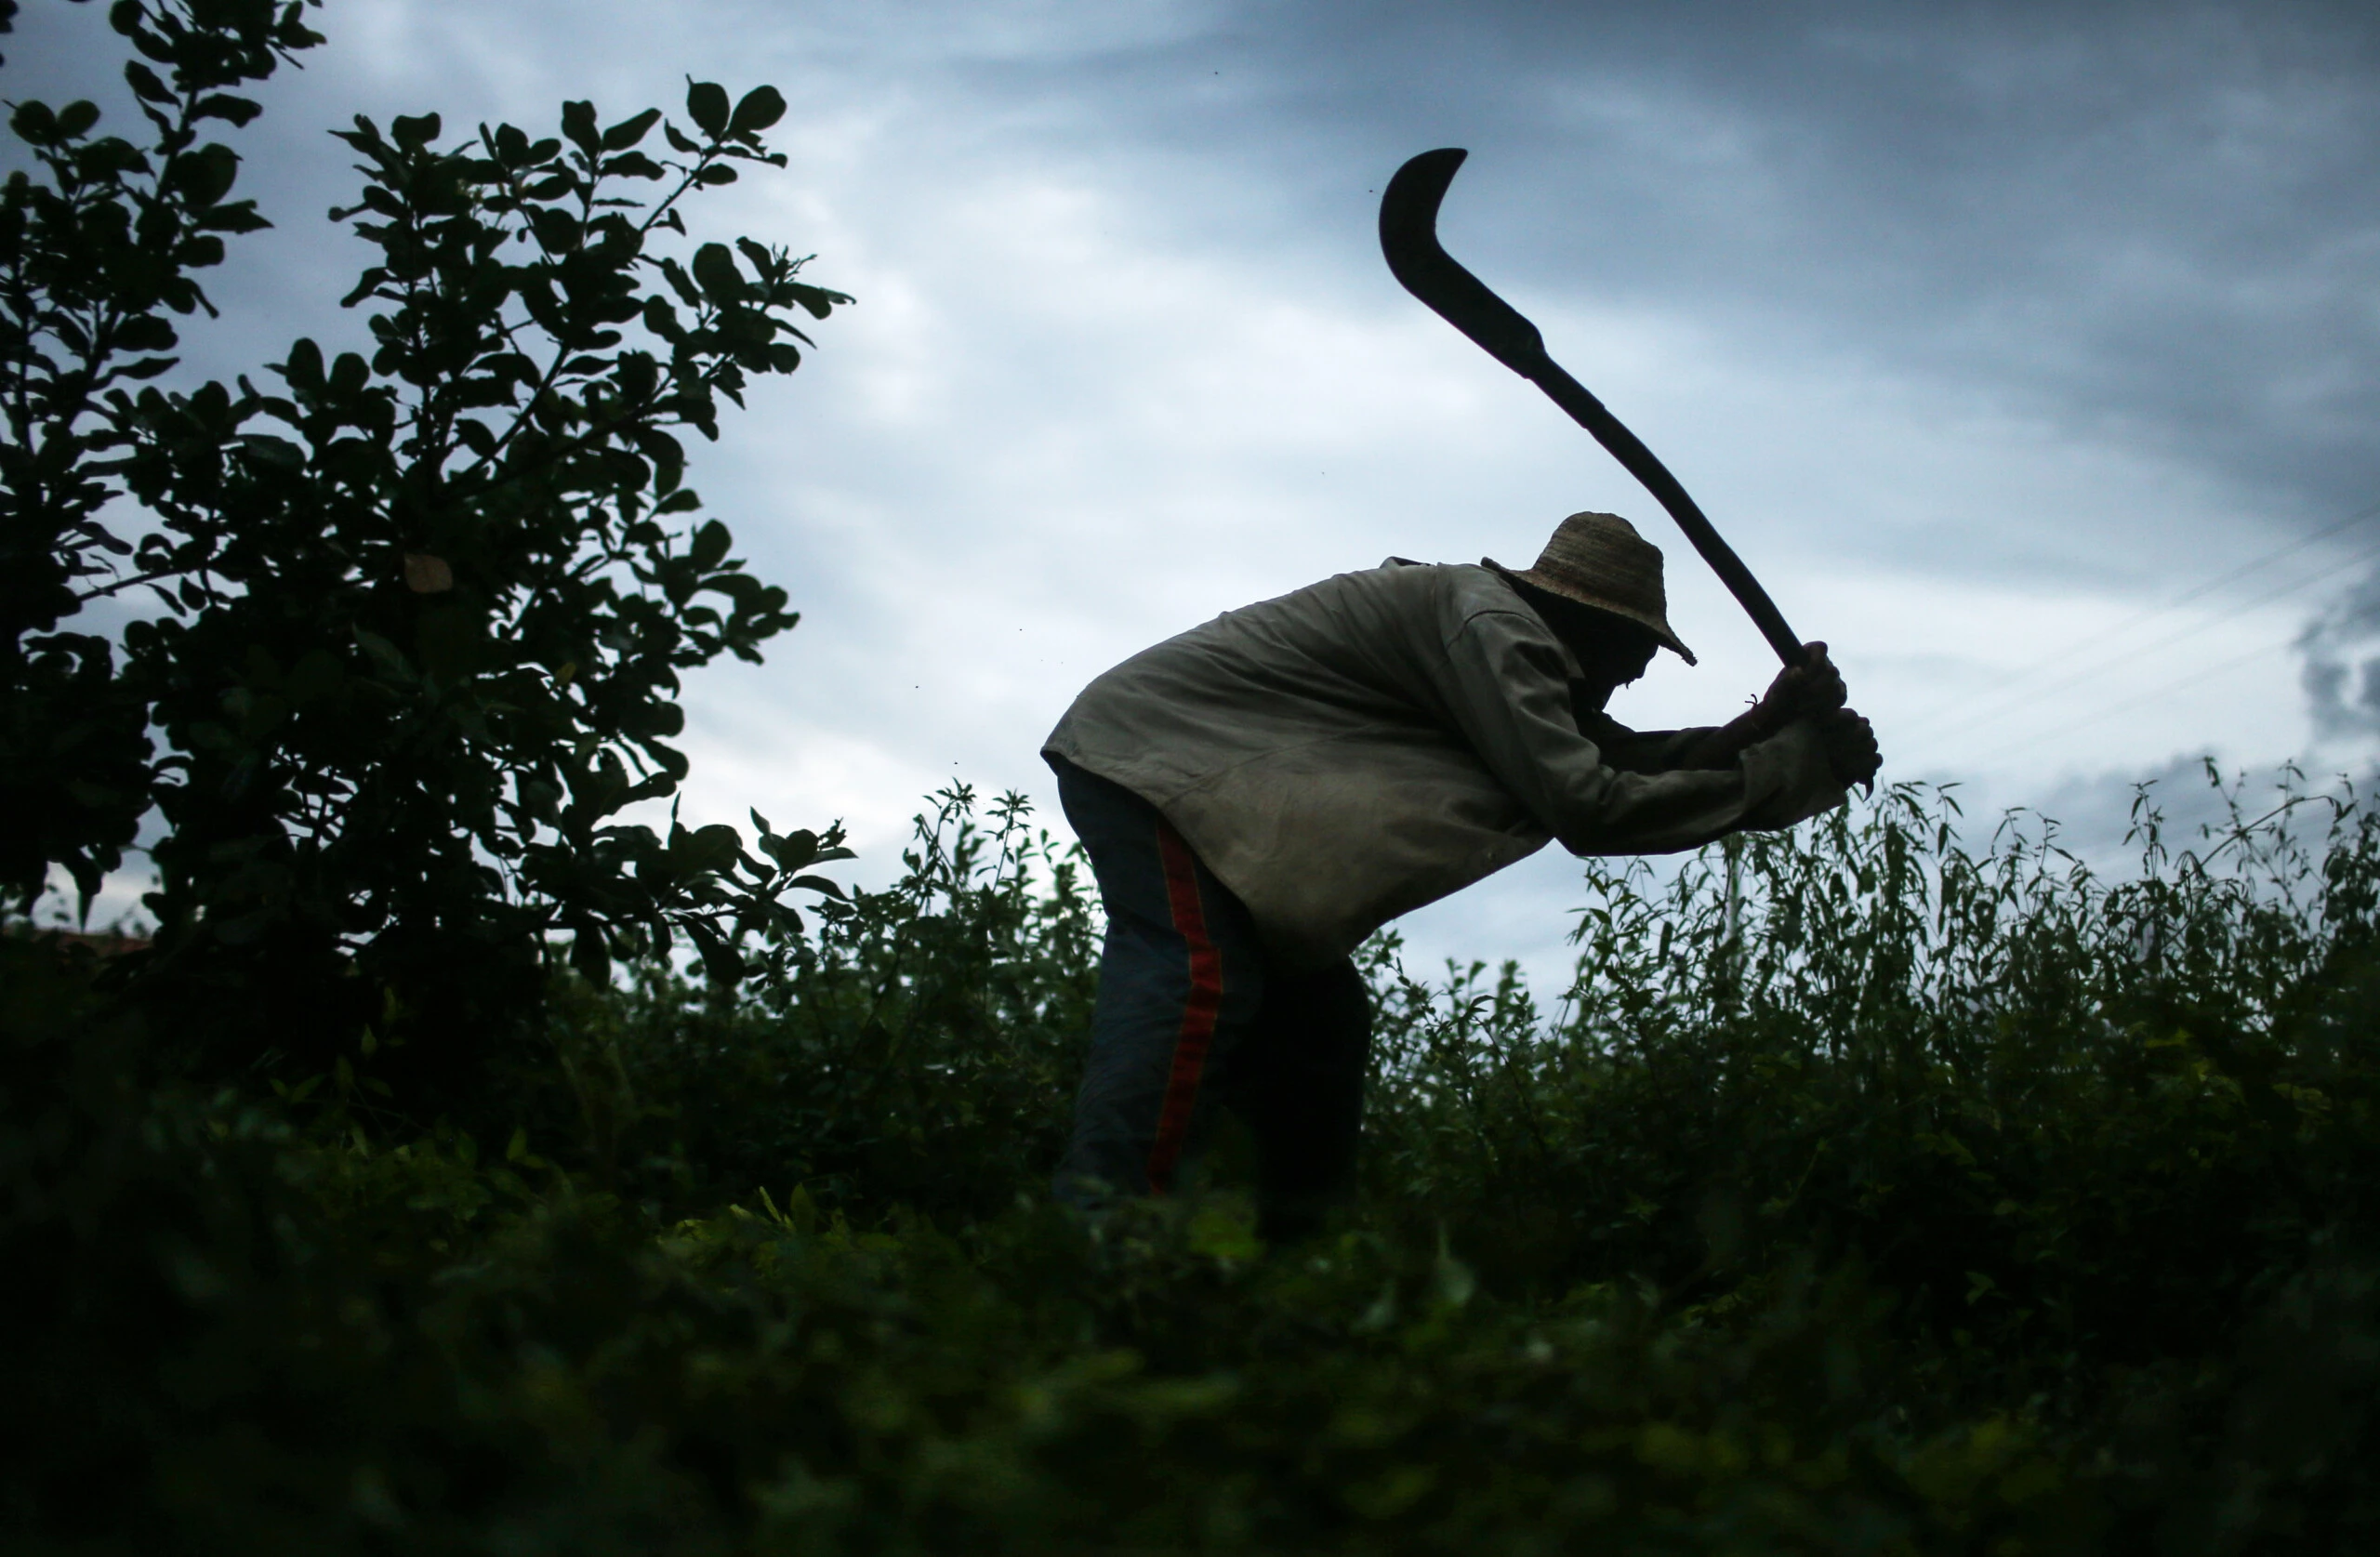 MONSENHOR GIL, BRAZIL - APRIL 8: Former slave Francisco Rodrigues dos Santos demonstrates how he clears brush with his sickle on the piece of land which he lives and farms at the Nova Conquista settlement on April 8, 2015 in Monsenhor Gil, Piauí state, Brazil. He said he used the same type of tool when he was enslaved. (Photo by Mario Tama/Getty Images)